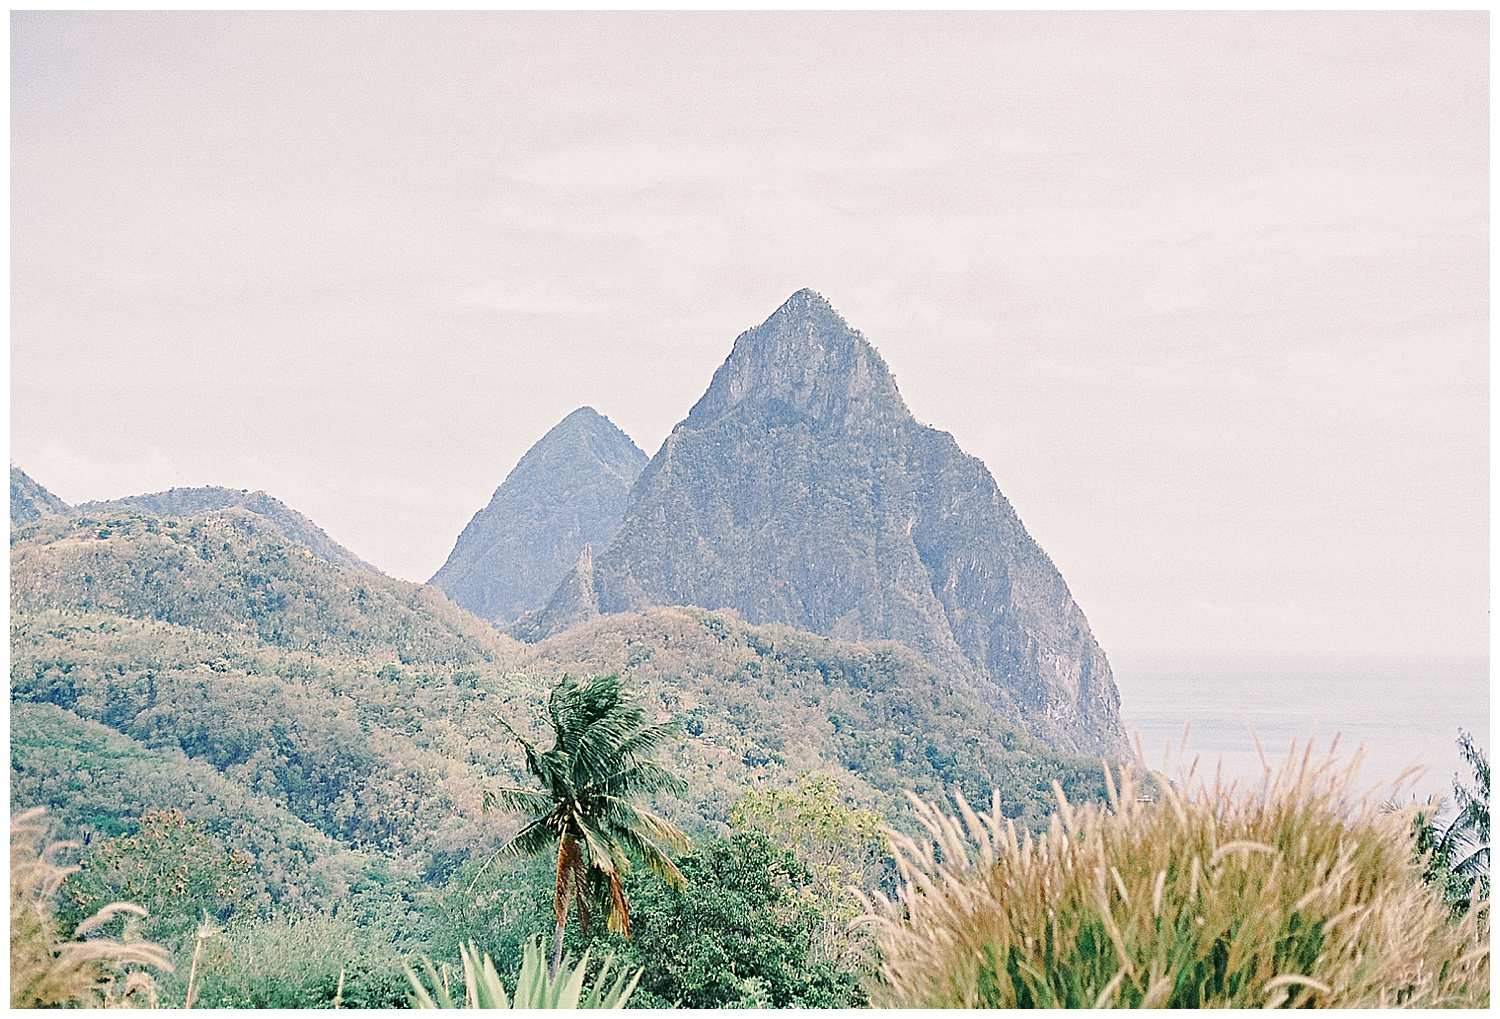 The Pitons in St Lucia